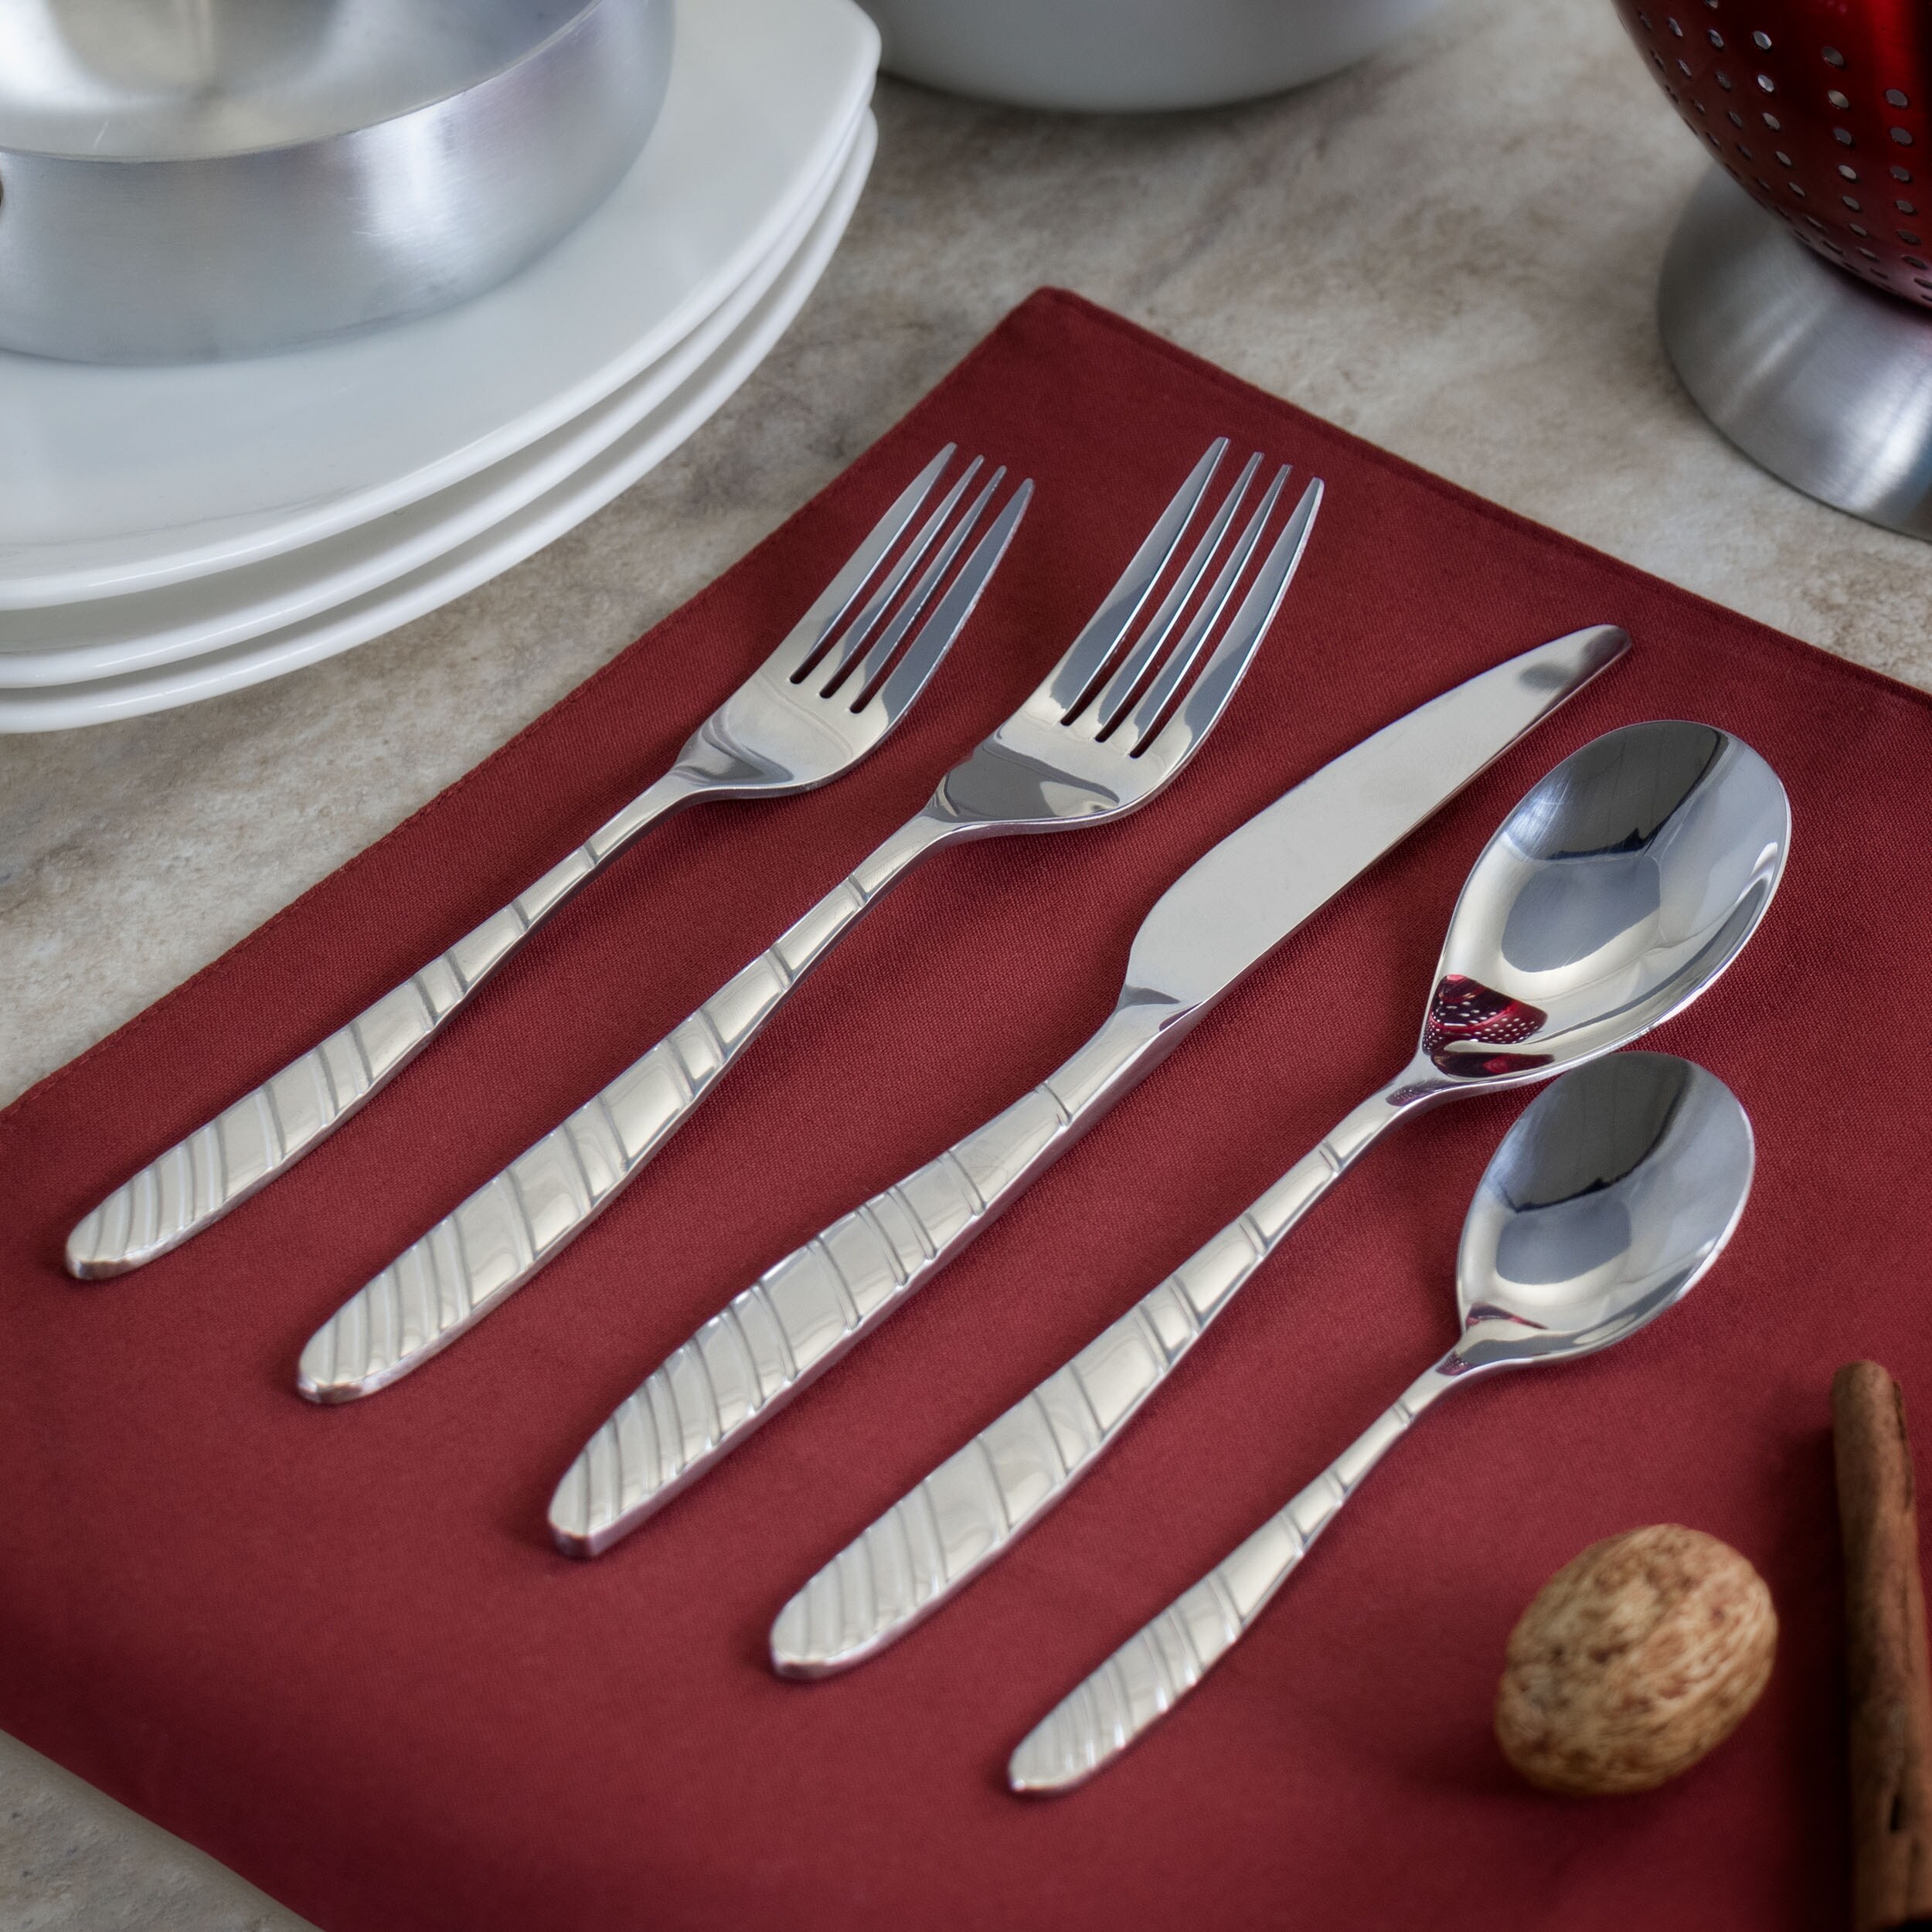 https://ak1.ostkcdn.com/images/products/is/images/direct/4019f18896a1973212cb0c8a26318f6e76bd0763/MegaChef-La-Vague-20-Piece-Flatware-Utensil-Set%2C-Stainless-Steel-Silverware-Metal-Service-for-4-in-Silver.jpg